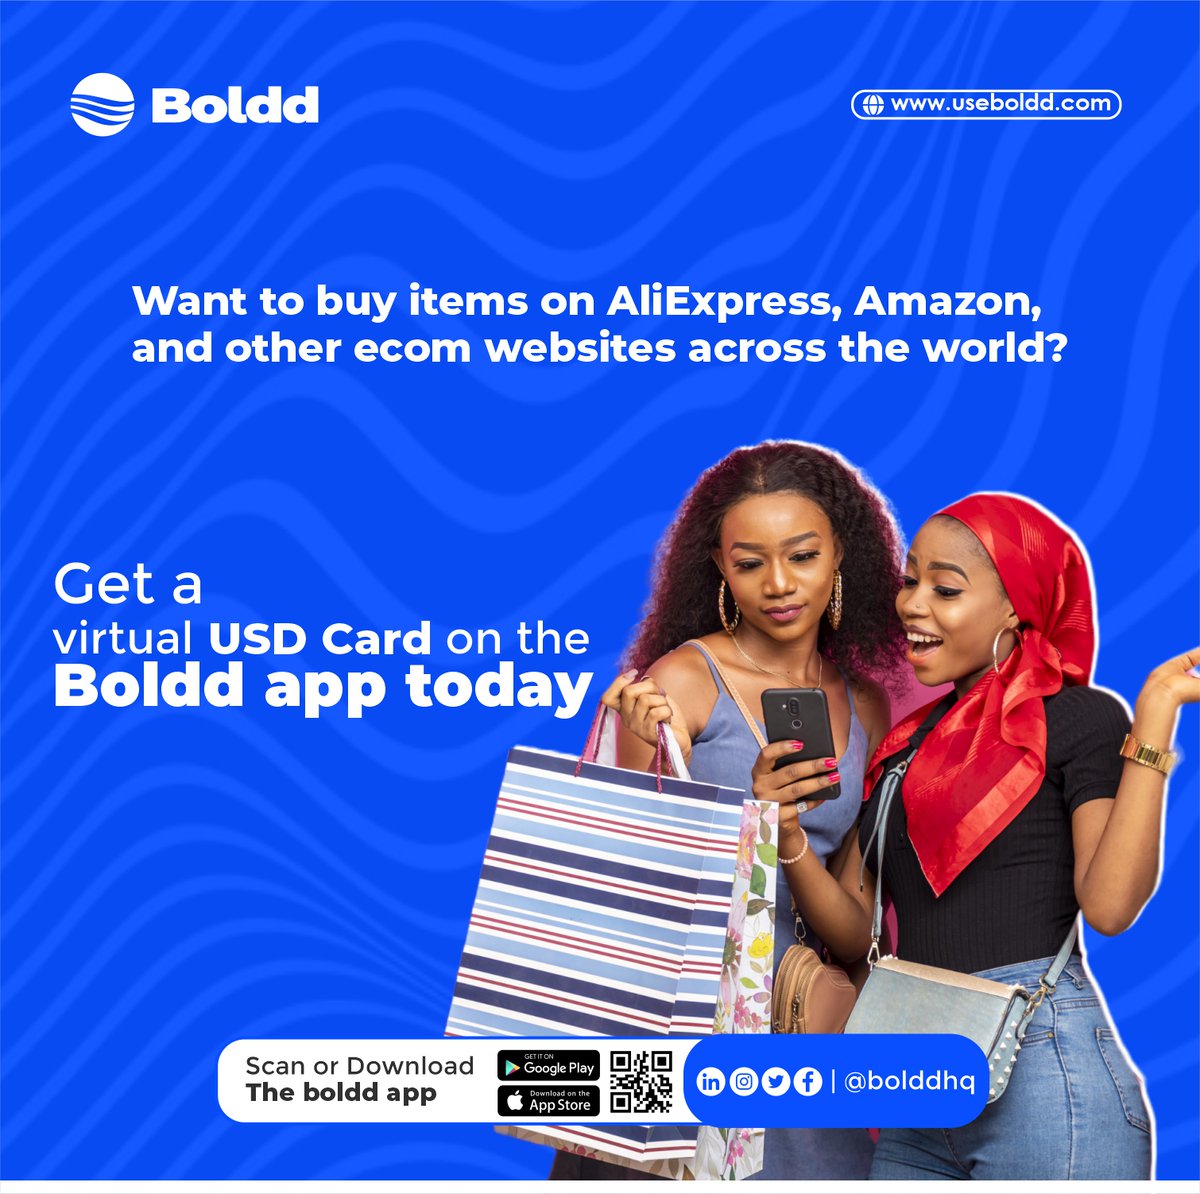 Have you created a USD card yet?

With your Virtual dollar card, you can make international transactions as seamless as possible. Join other businesses making seamless transactions today! Create your virtual dollar card here useboldd.com

#Boldd #usd #businesssucess